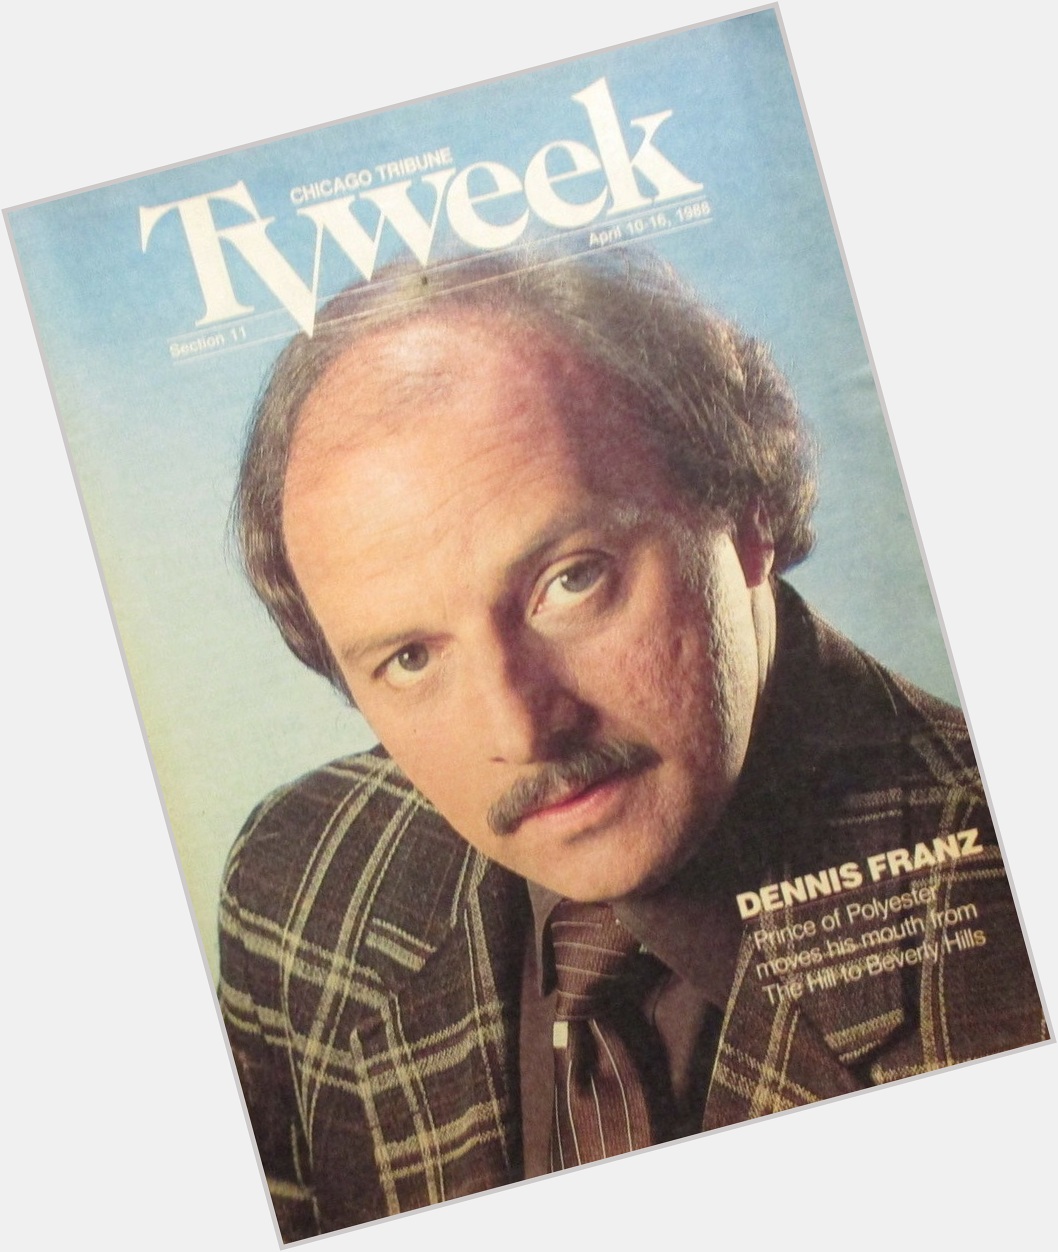 Happy Birthday to Chicago\s own Dennis Franz
Born on this date in 1944.
Chicago Tribune TV Week.  April 10-16, 1988 